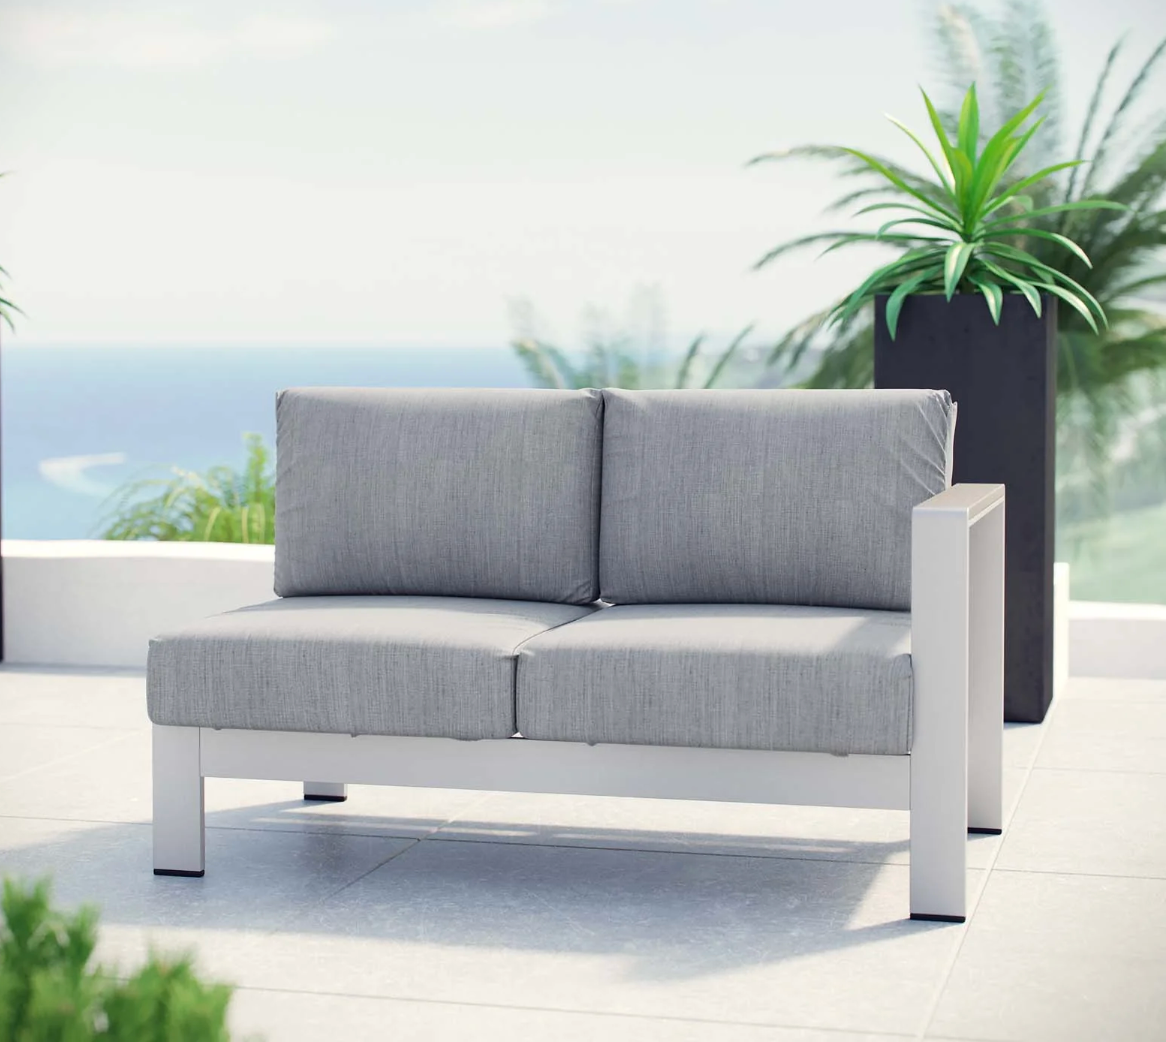 Grey and Silver Aluminum Corner Sectional Outdoor Sofa